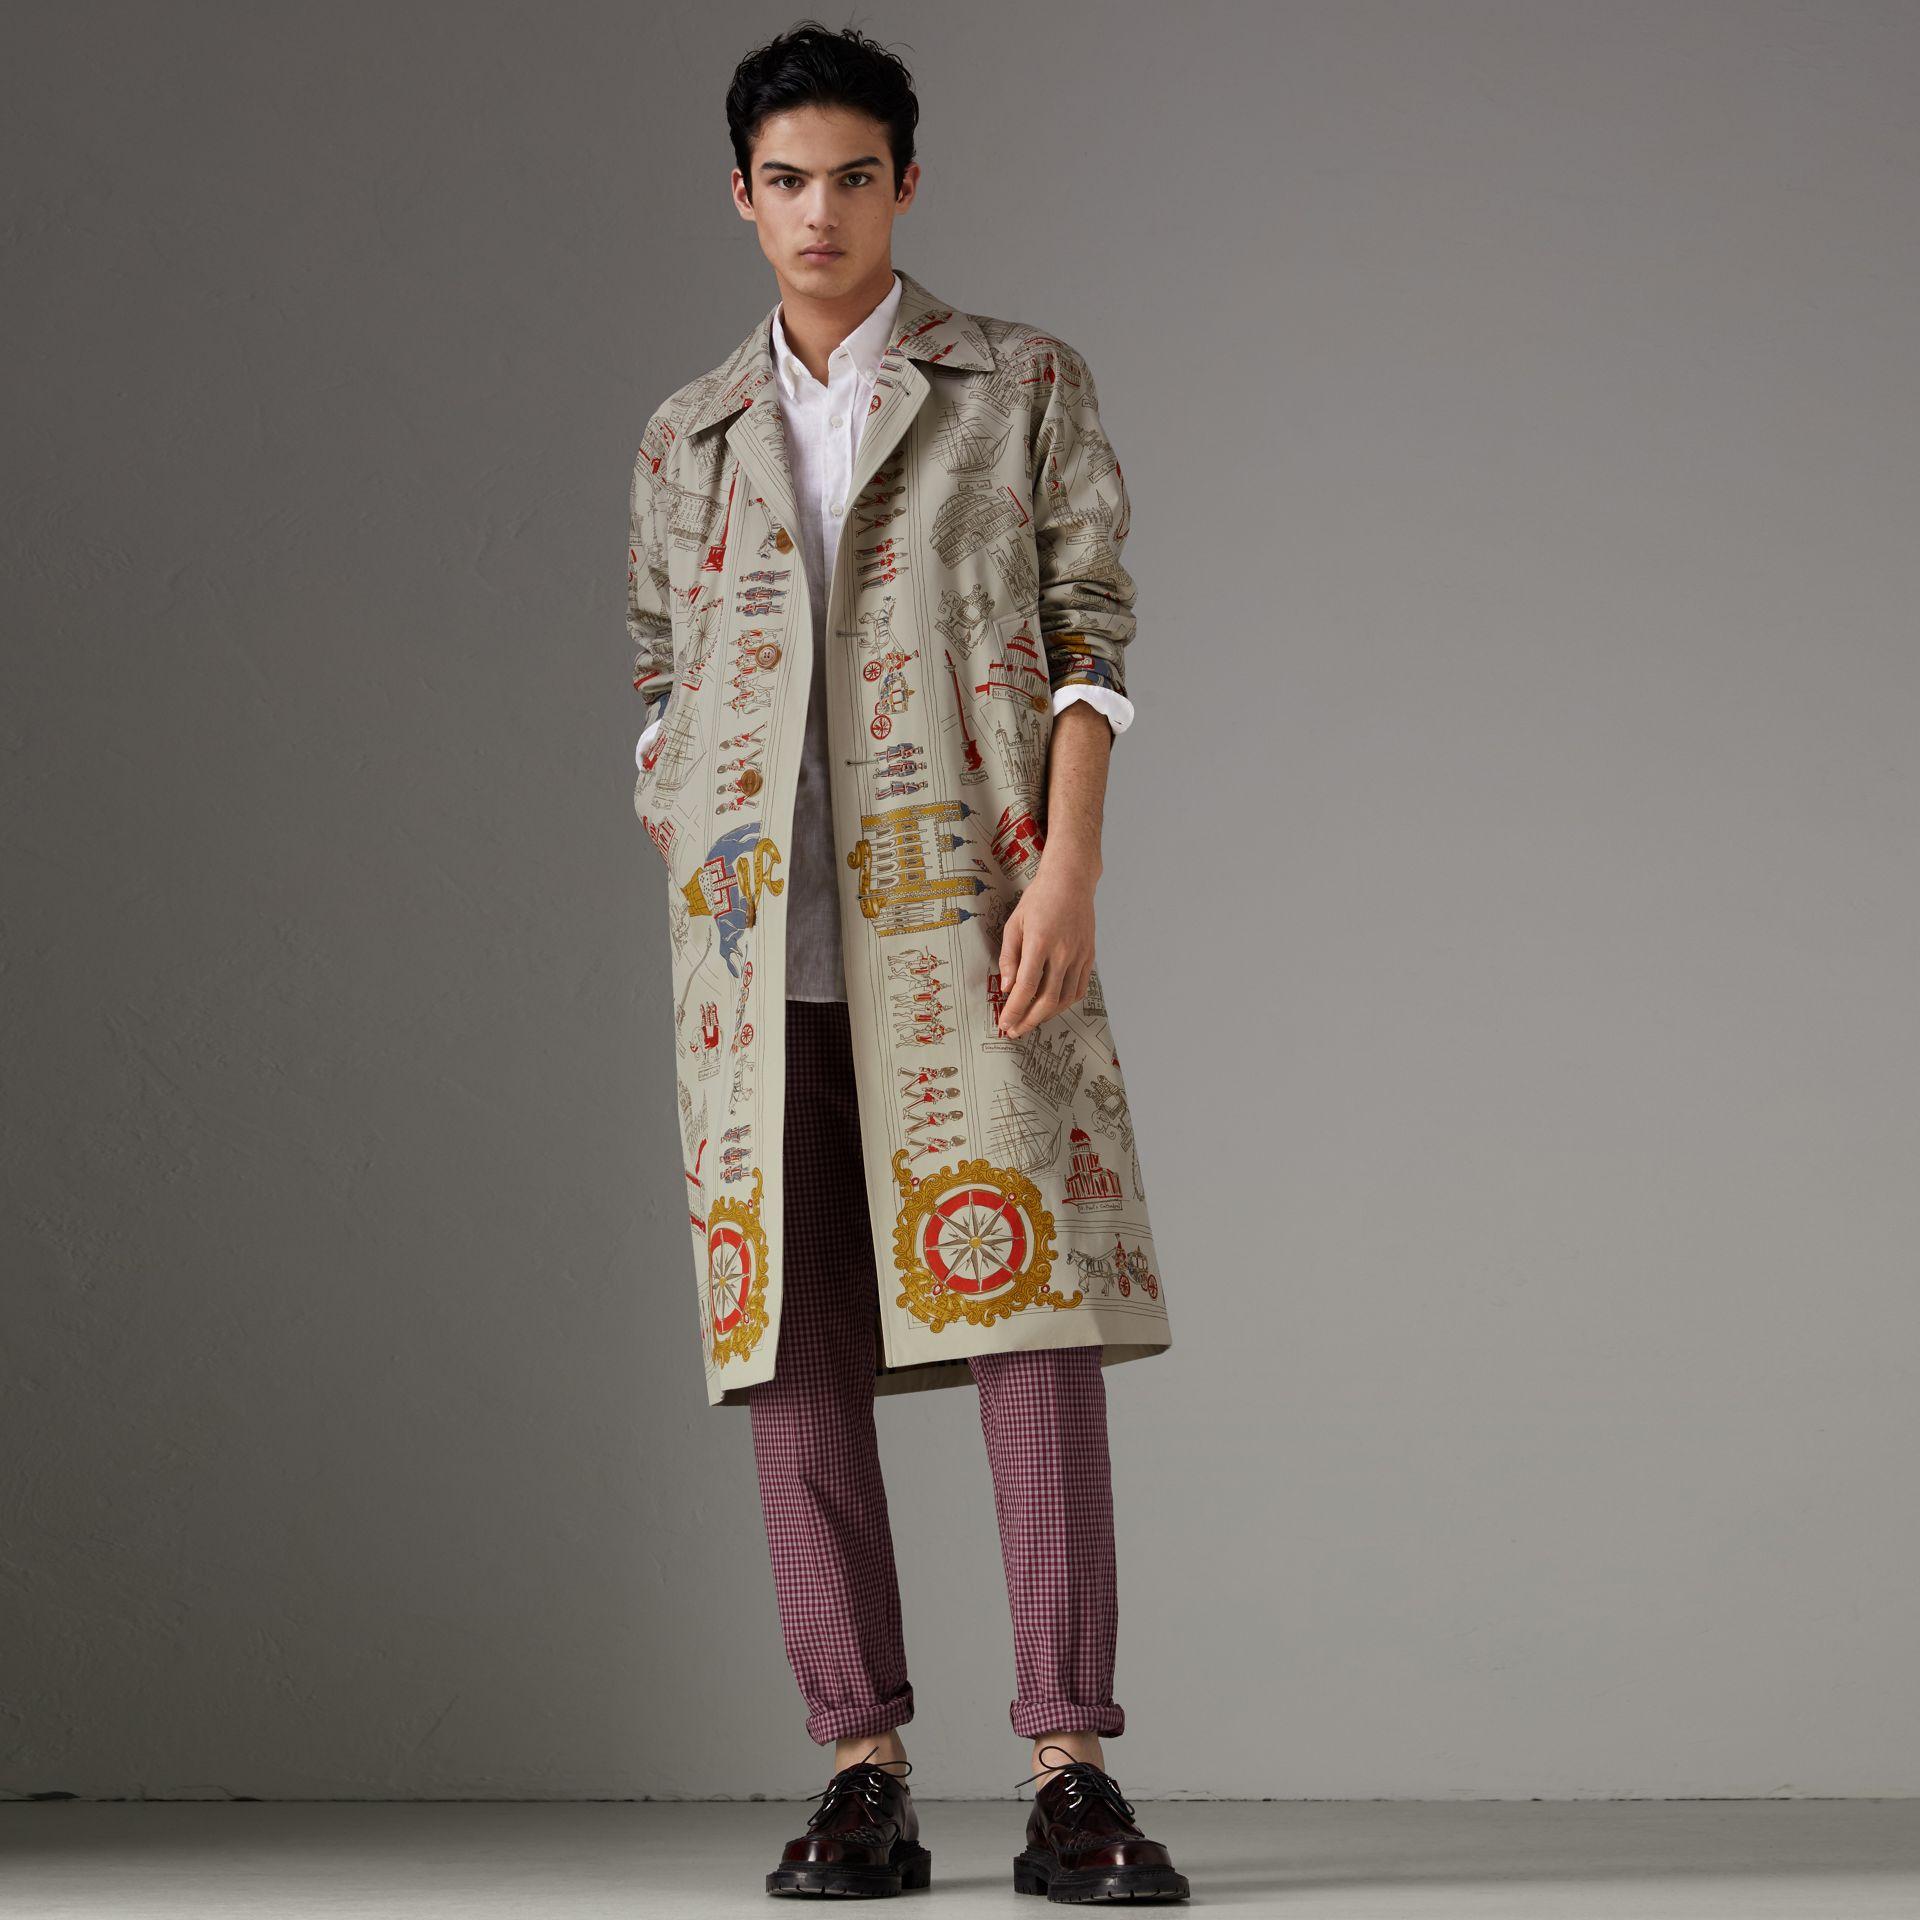 burberry sketch print trench coat